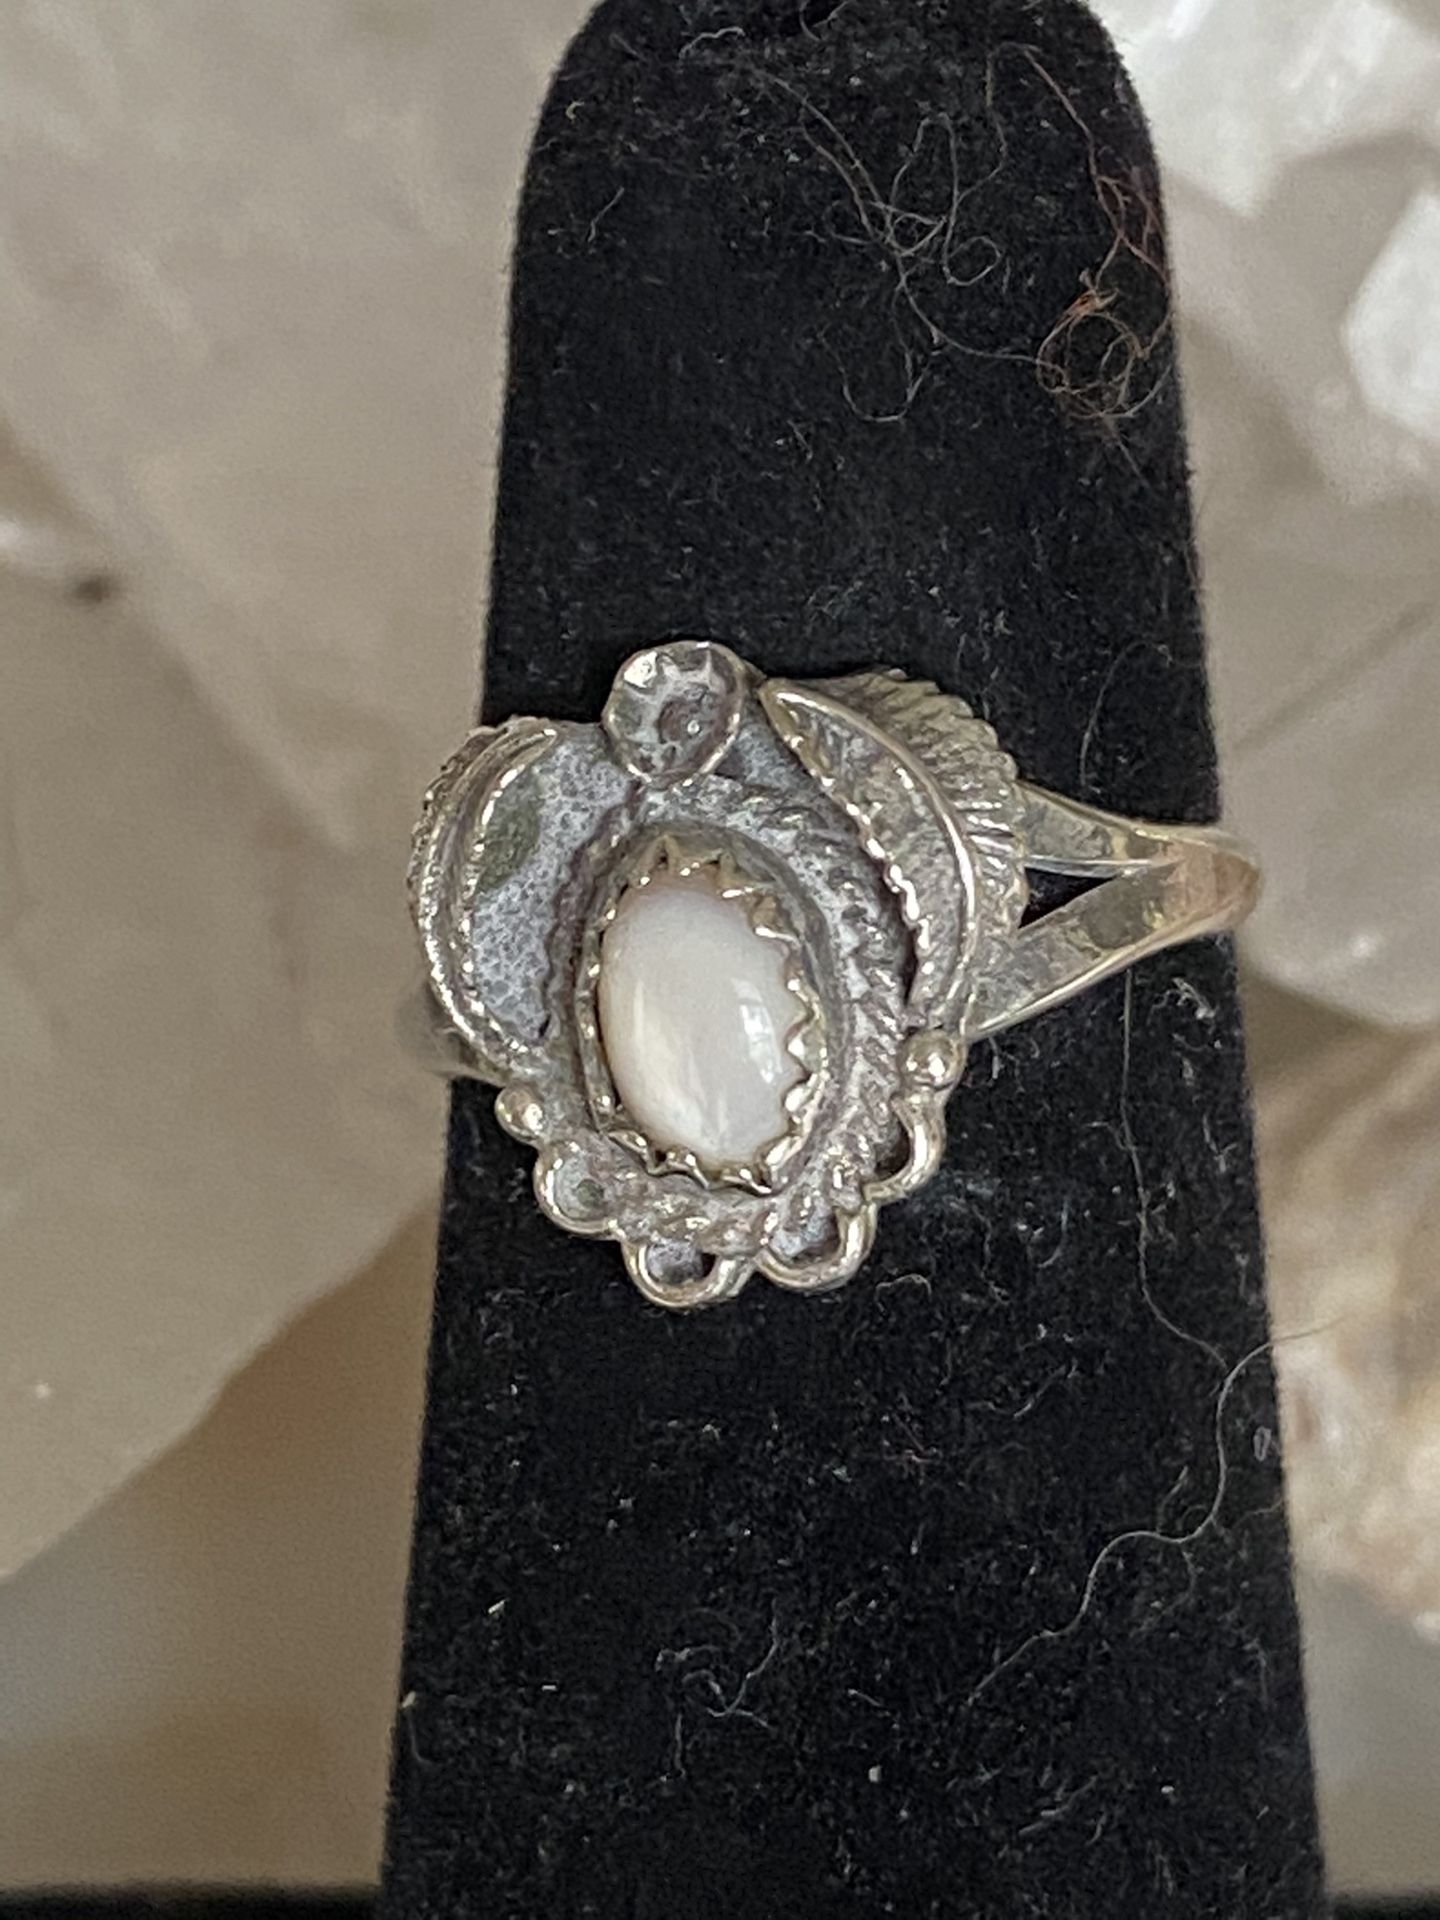 Petite Vintage Native American Moonstone Sterling Silver Ring. Size